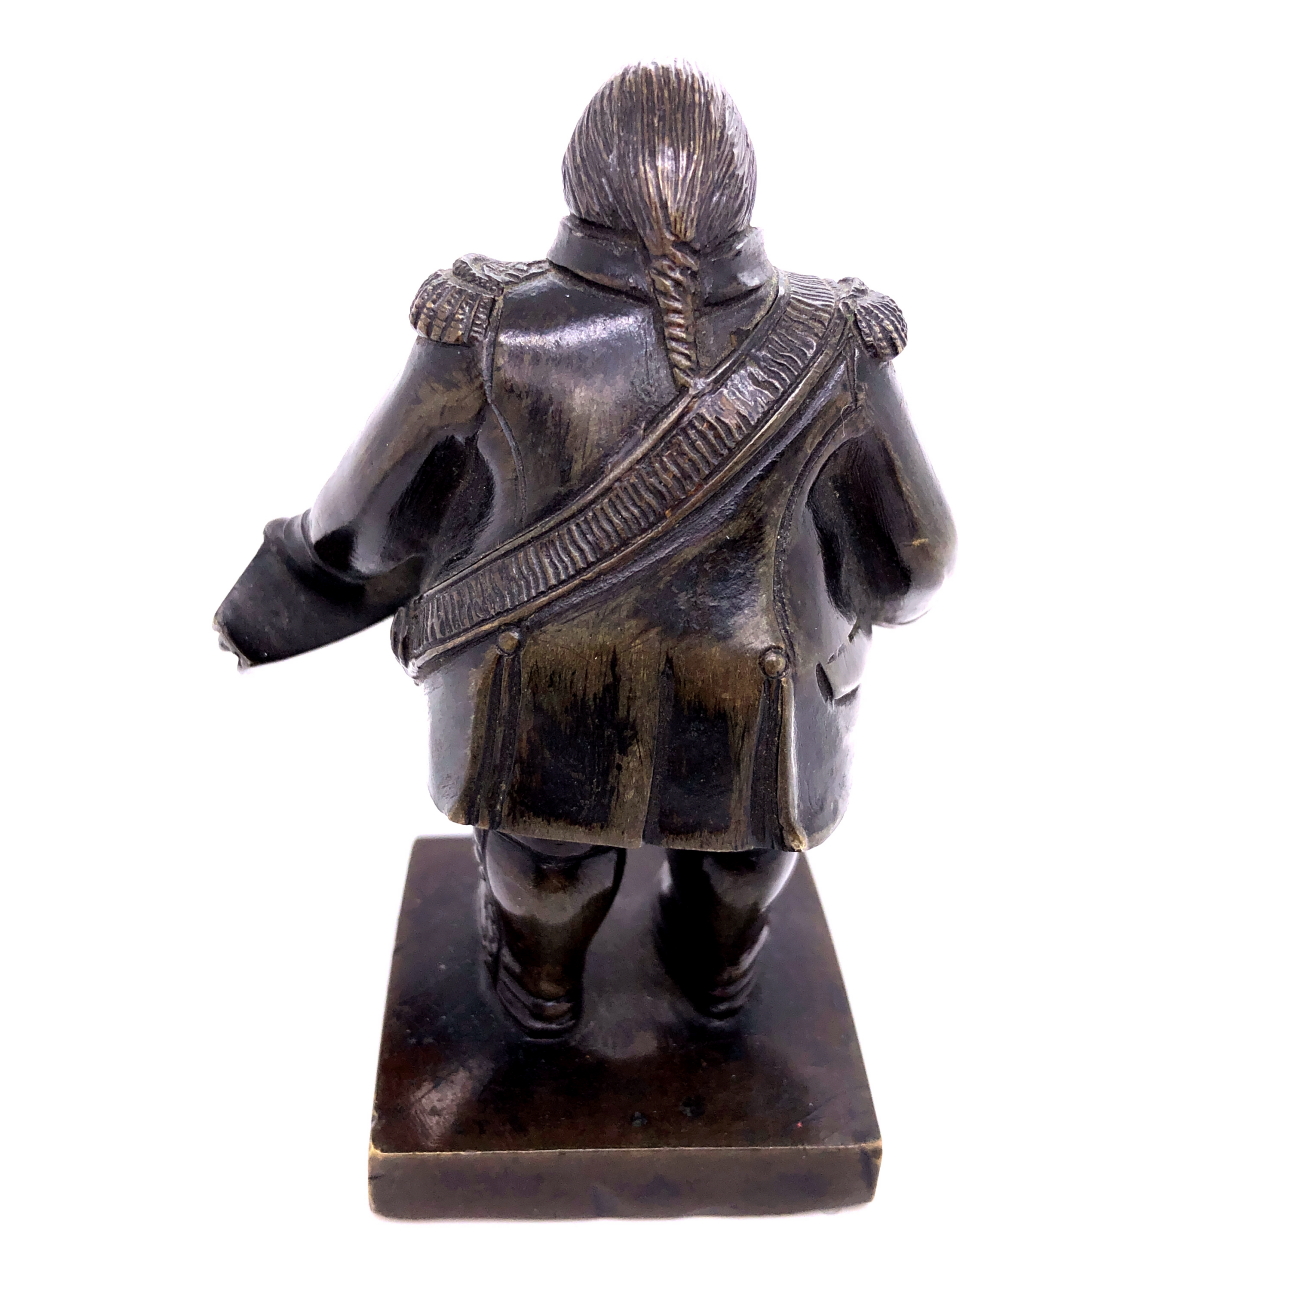 AN ANTIQUE PATINATED BRONZE FIGURE OF LOUIS XVIII " LE DESIRE" KING OF FRANCE. ON SQUARE PLINTH - Image 9 of 11